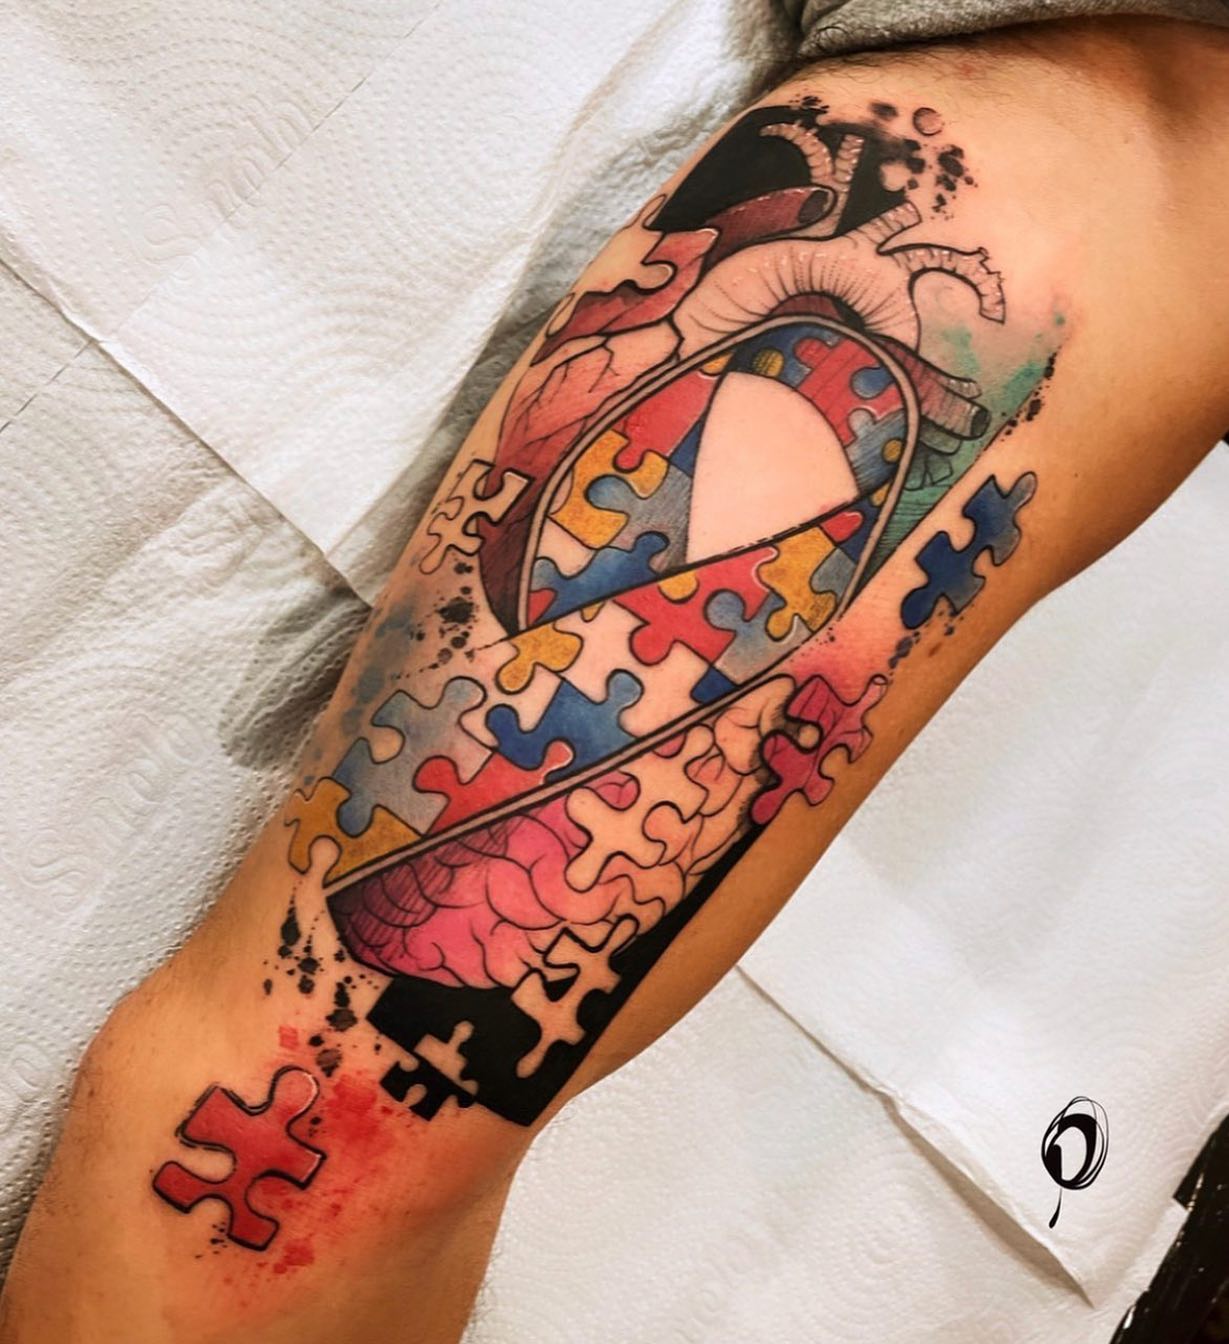 Big, loud, and colorful, this giant tattoo will suit those who fancy bigger ideas. Heads up since not a lot of tattoo artists will easily recreate it.